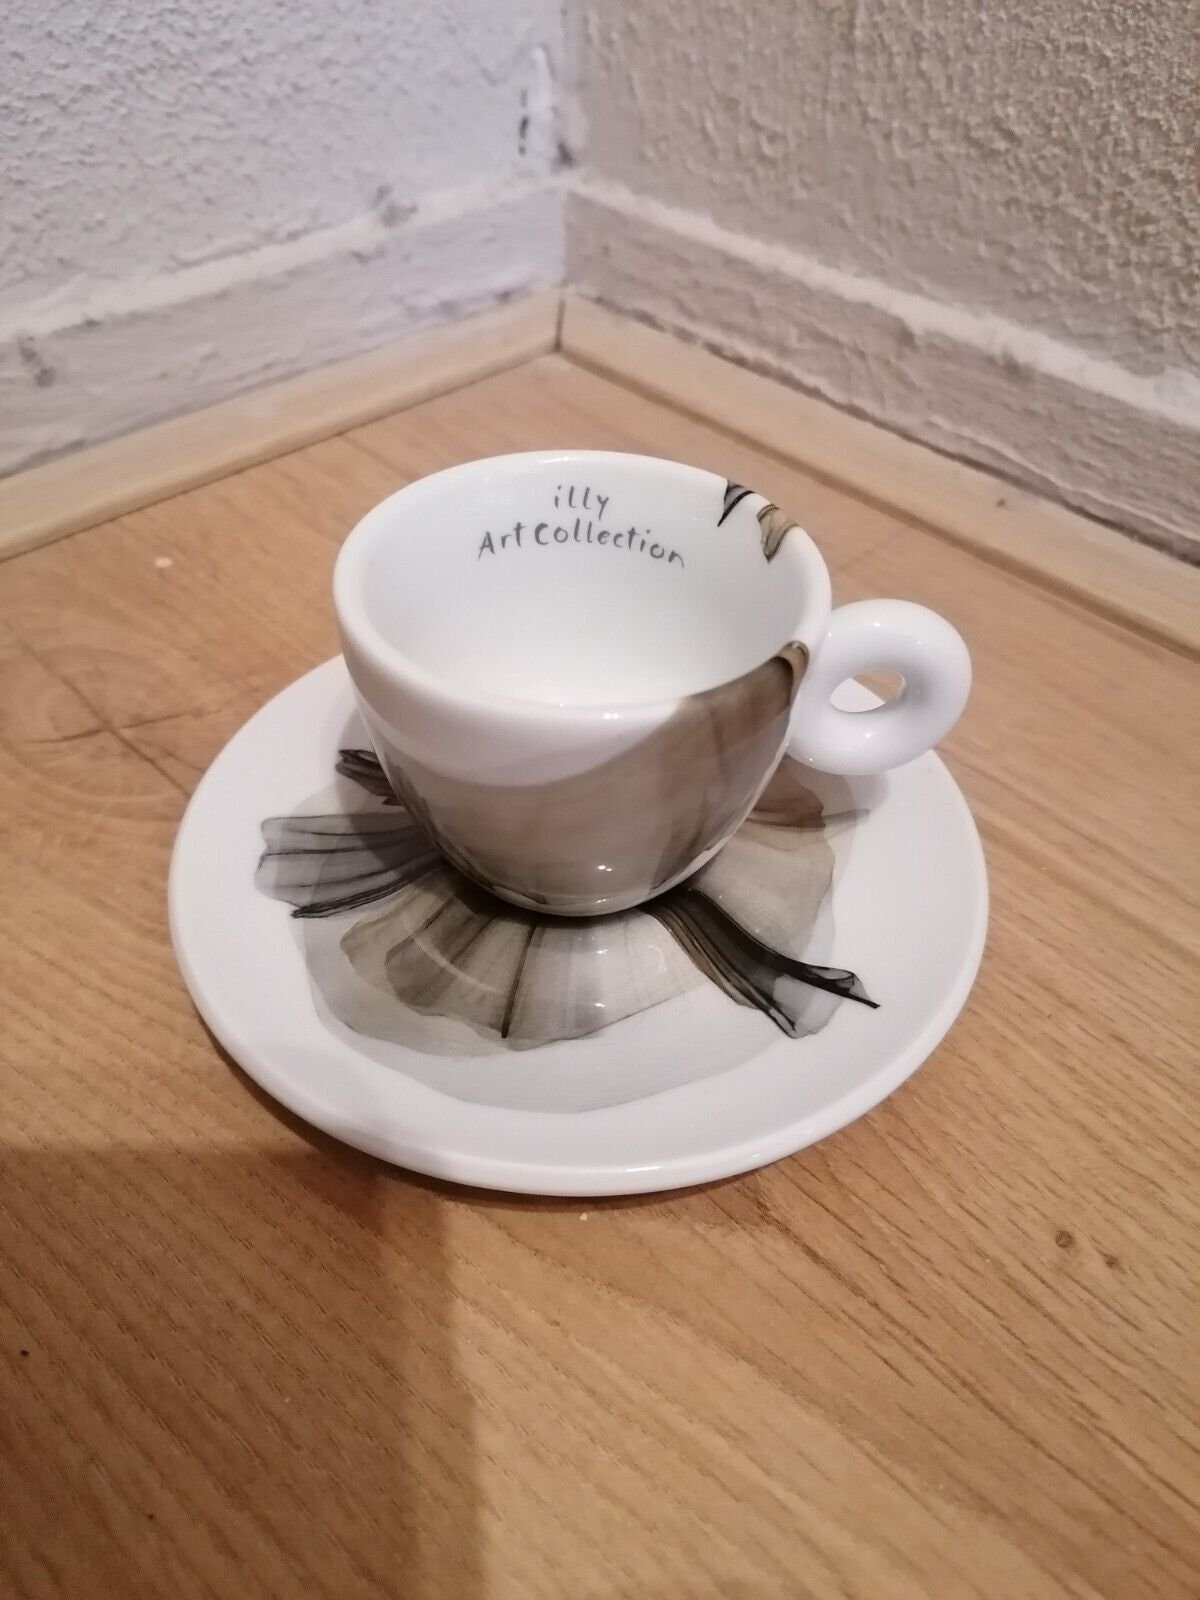 SAUCER SIGNED PEBBLES DESIGN  Illy ILLY 2001 MOMA PS1 ARTIST ESPRESSO CUP 